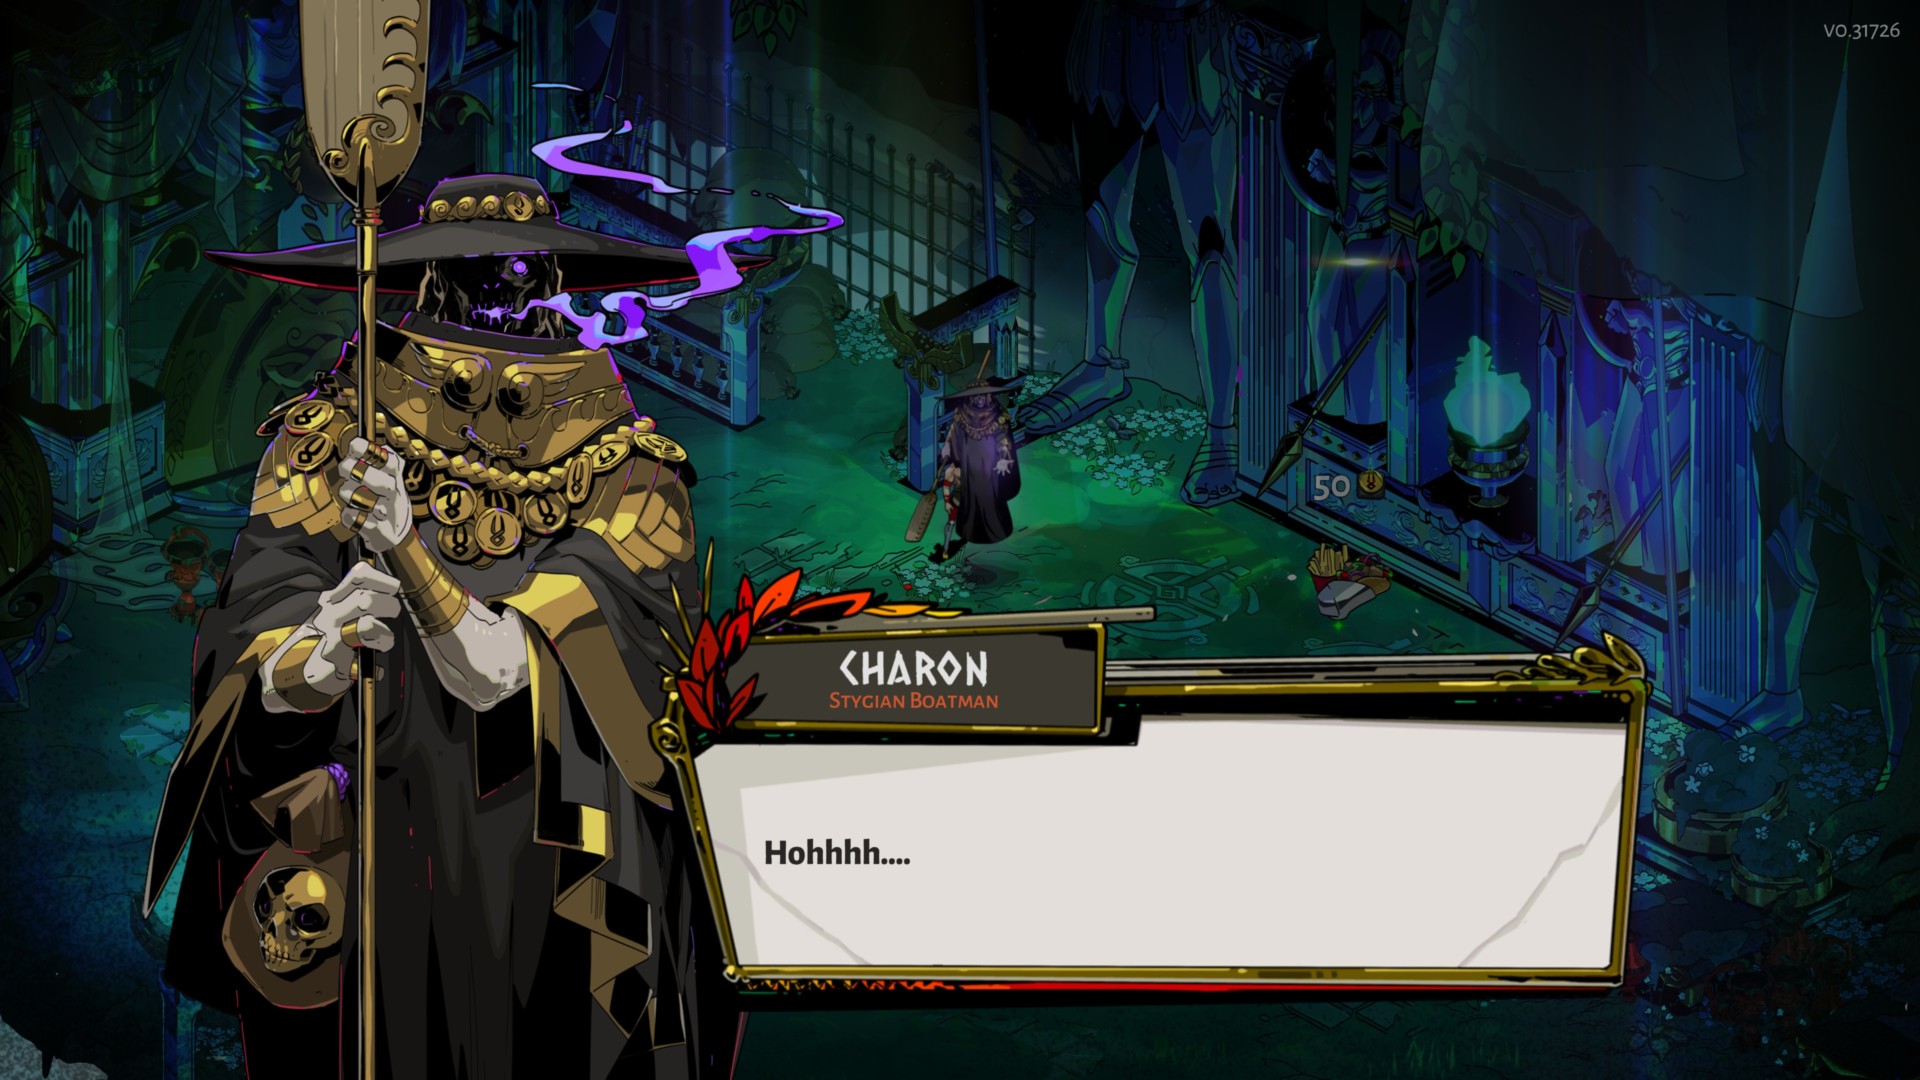 Charon from Hades